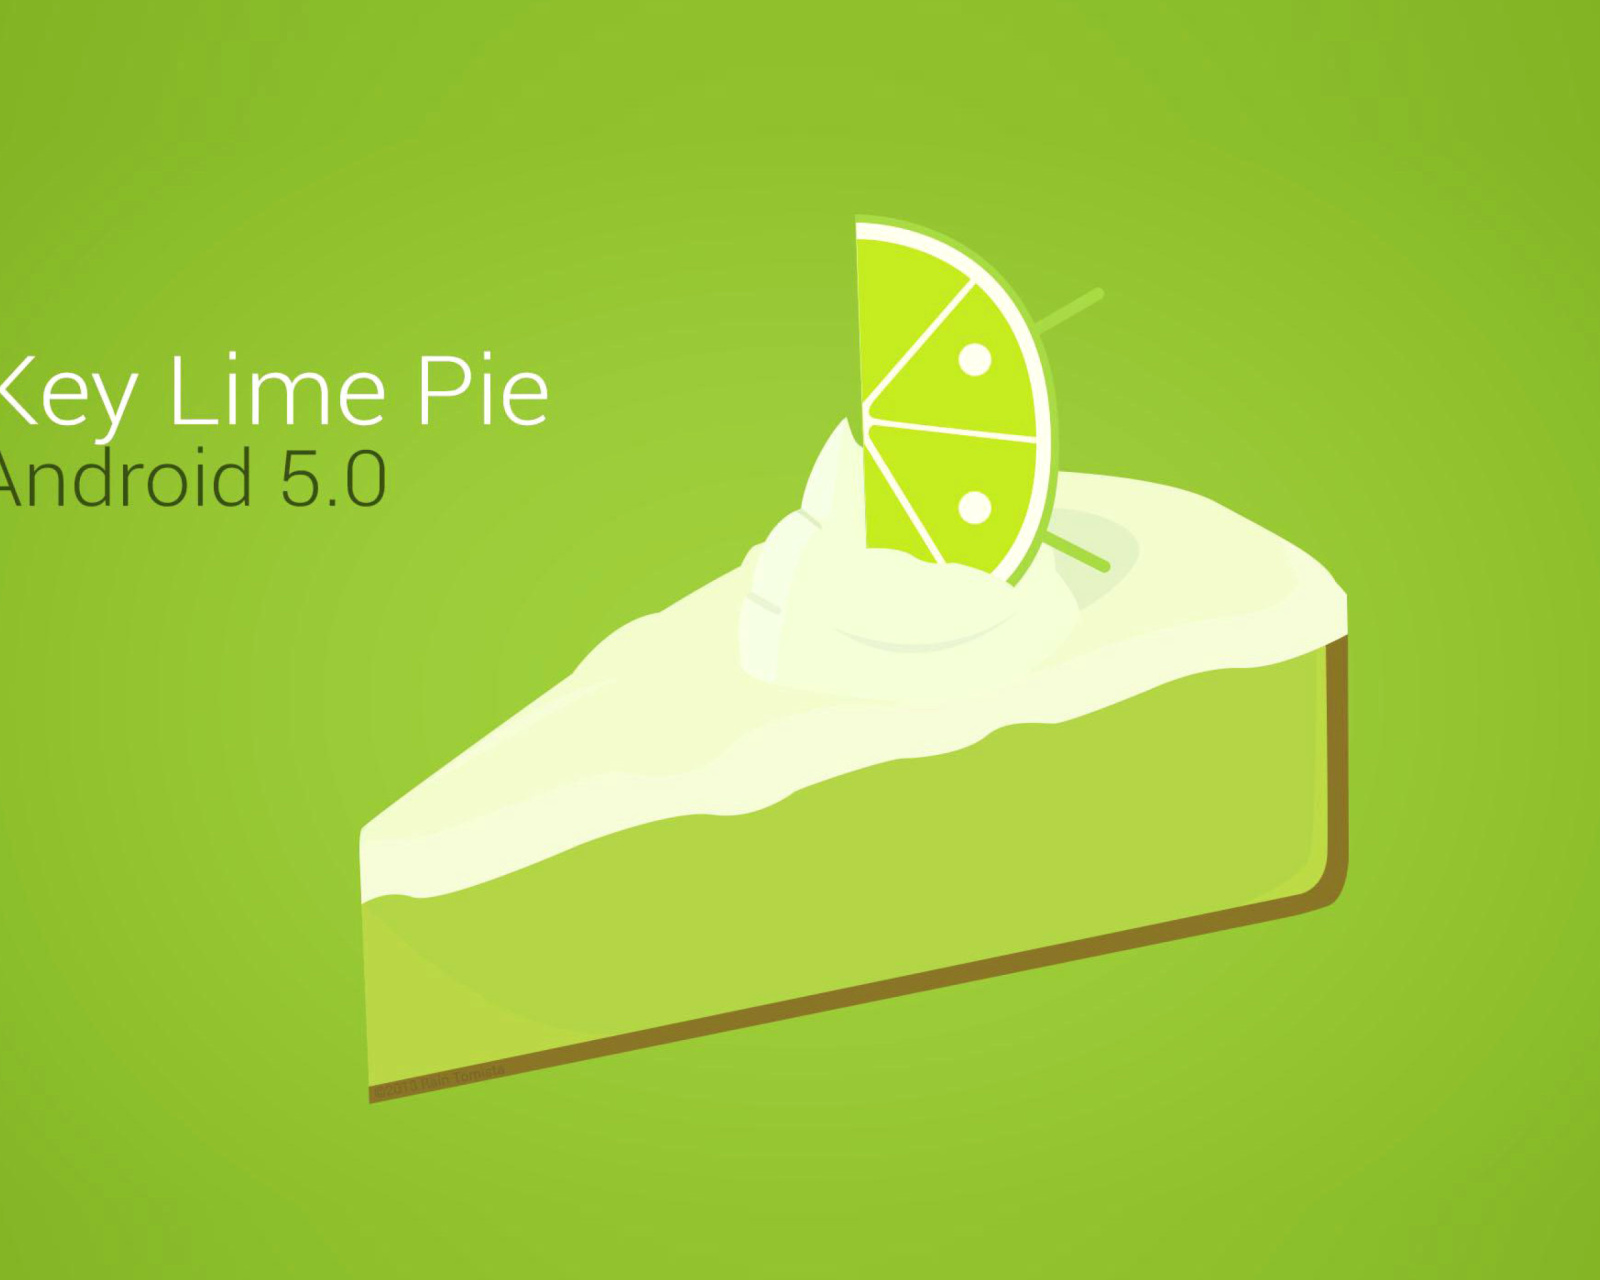 Concept Android 5.0 Key Lime Pie wallpaper 1600x1280